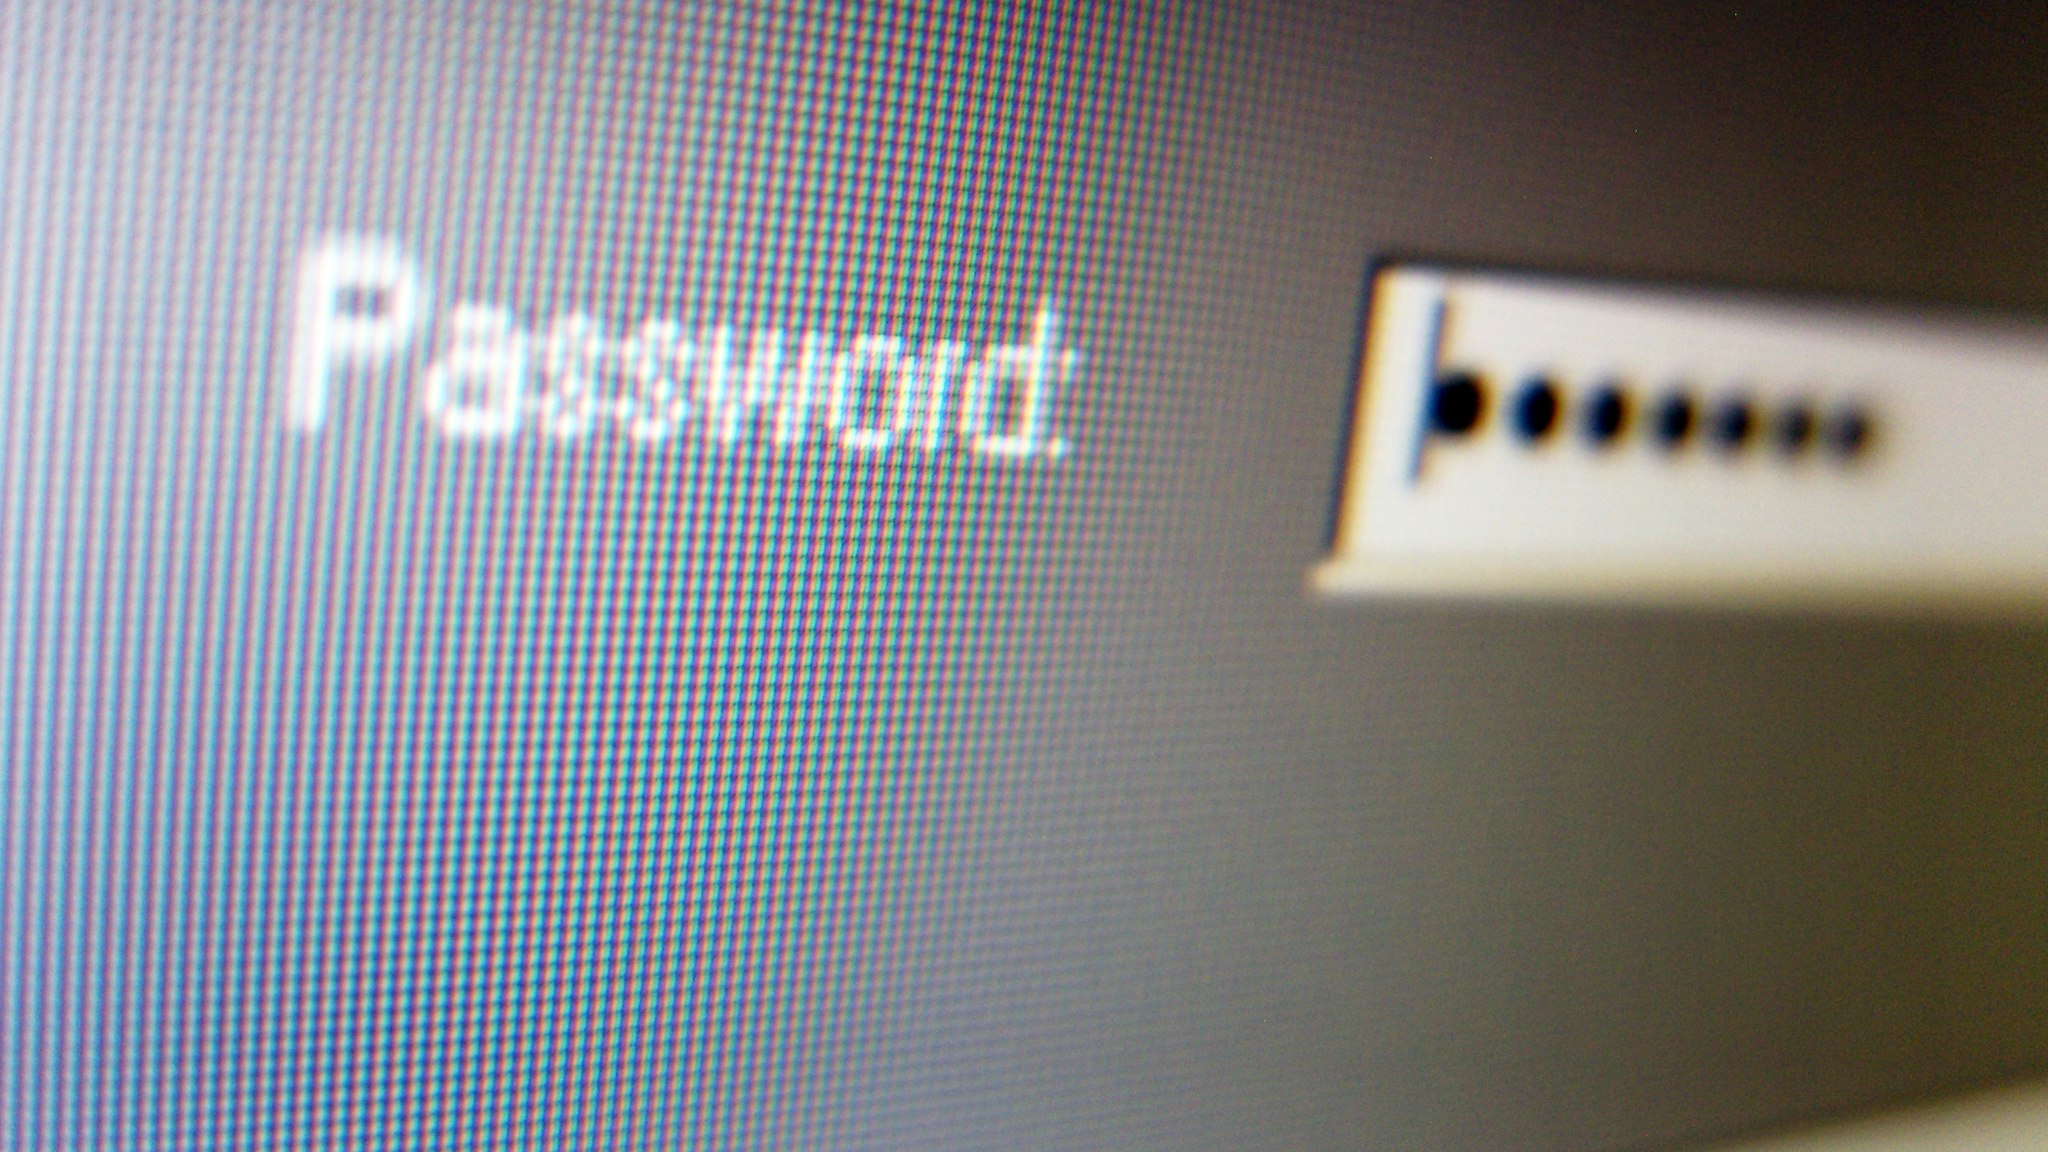 Password entry screen on computer screen.